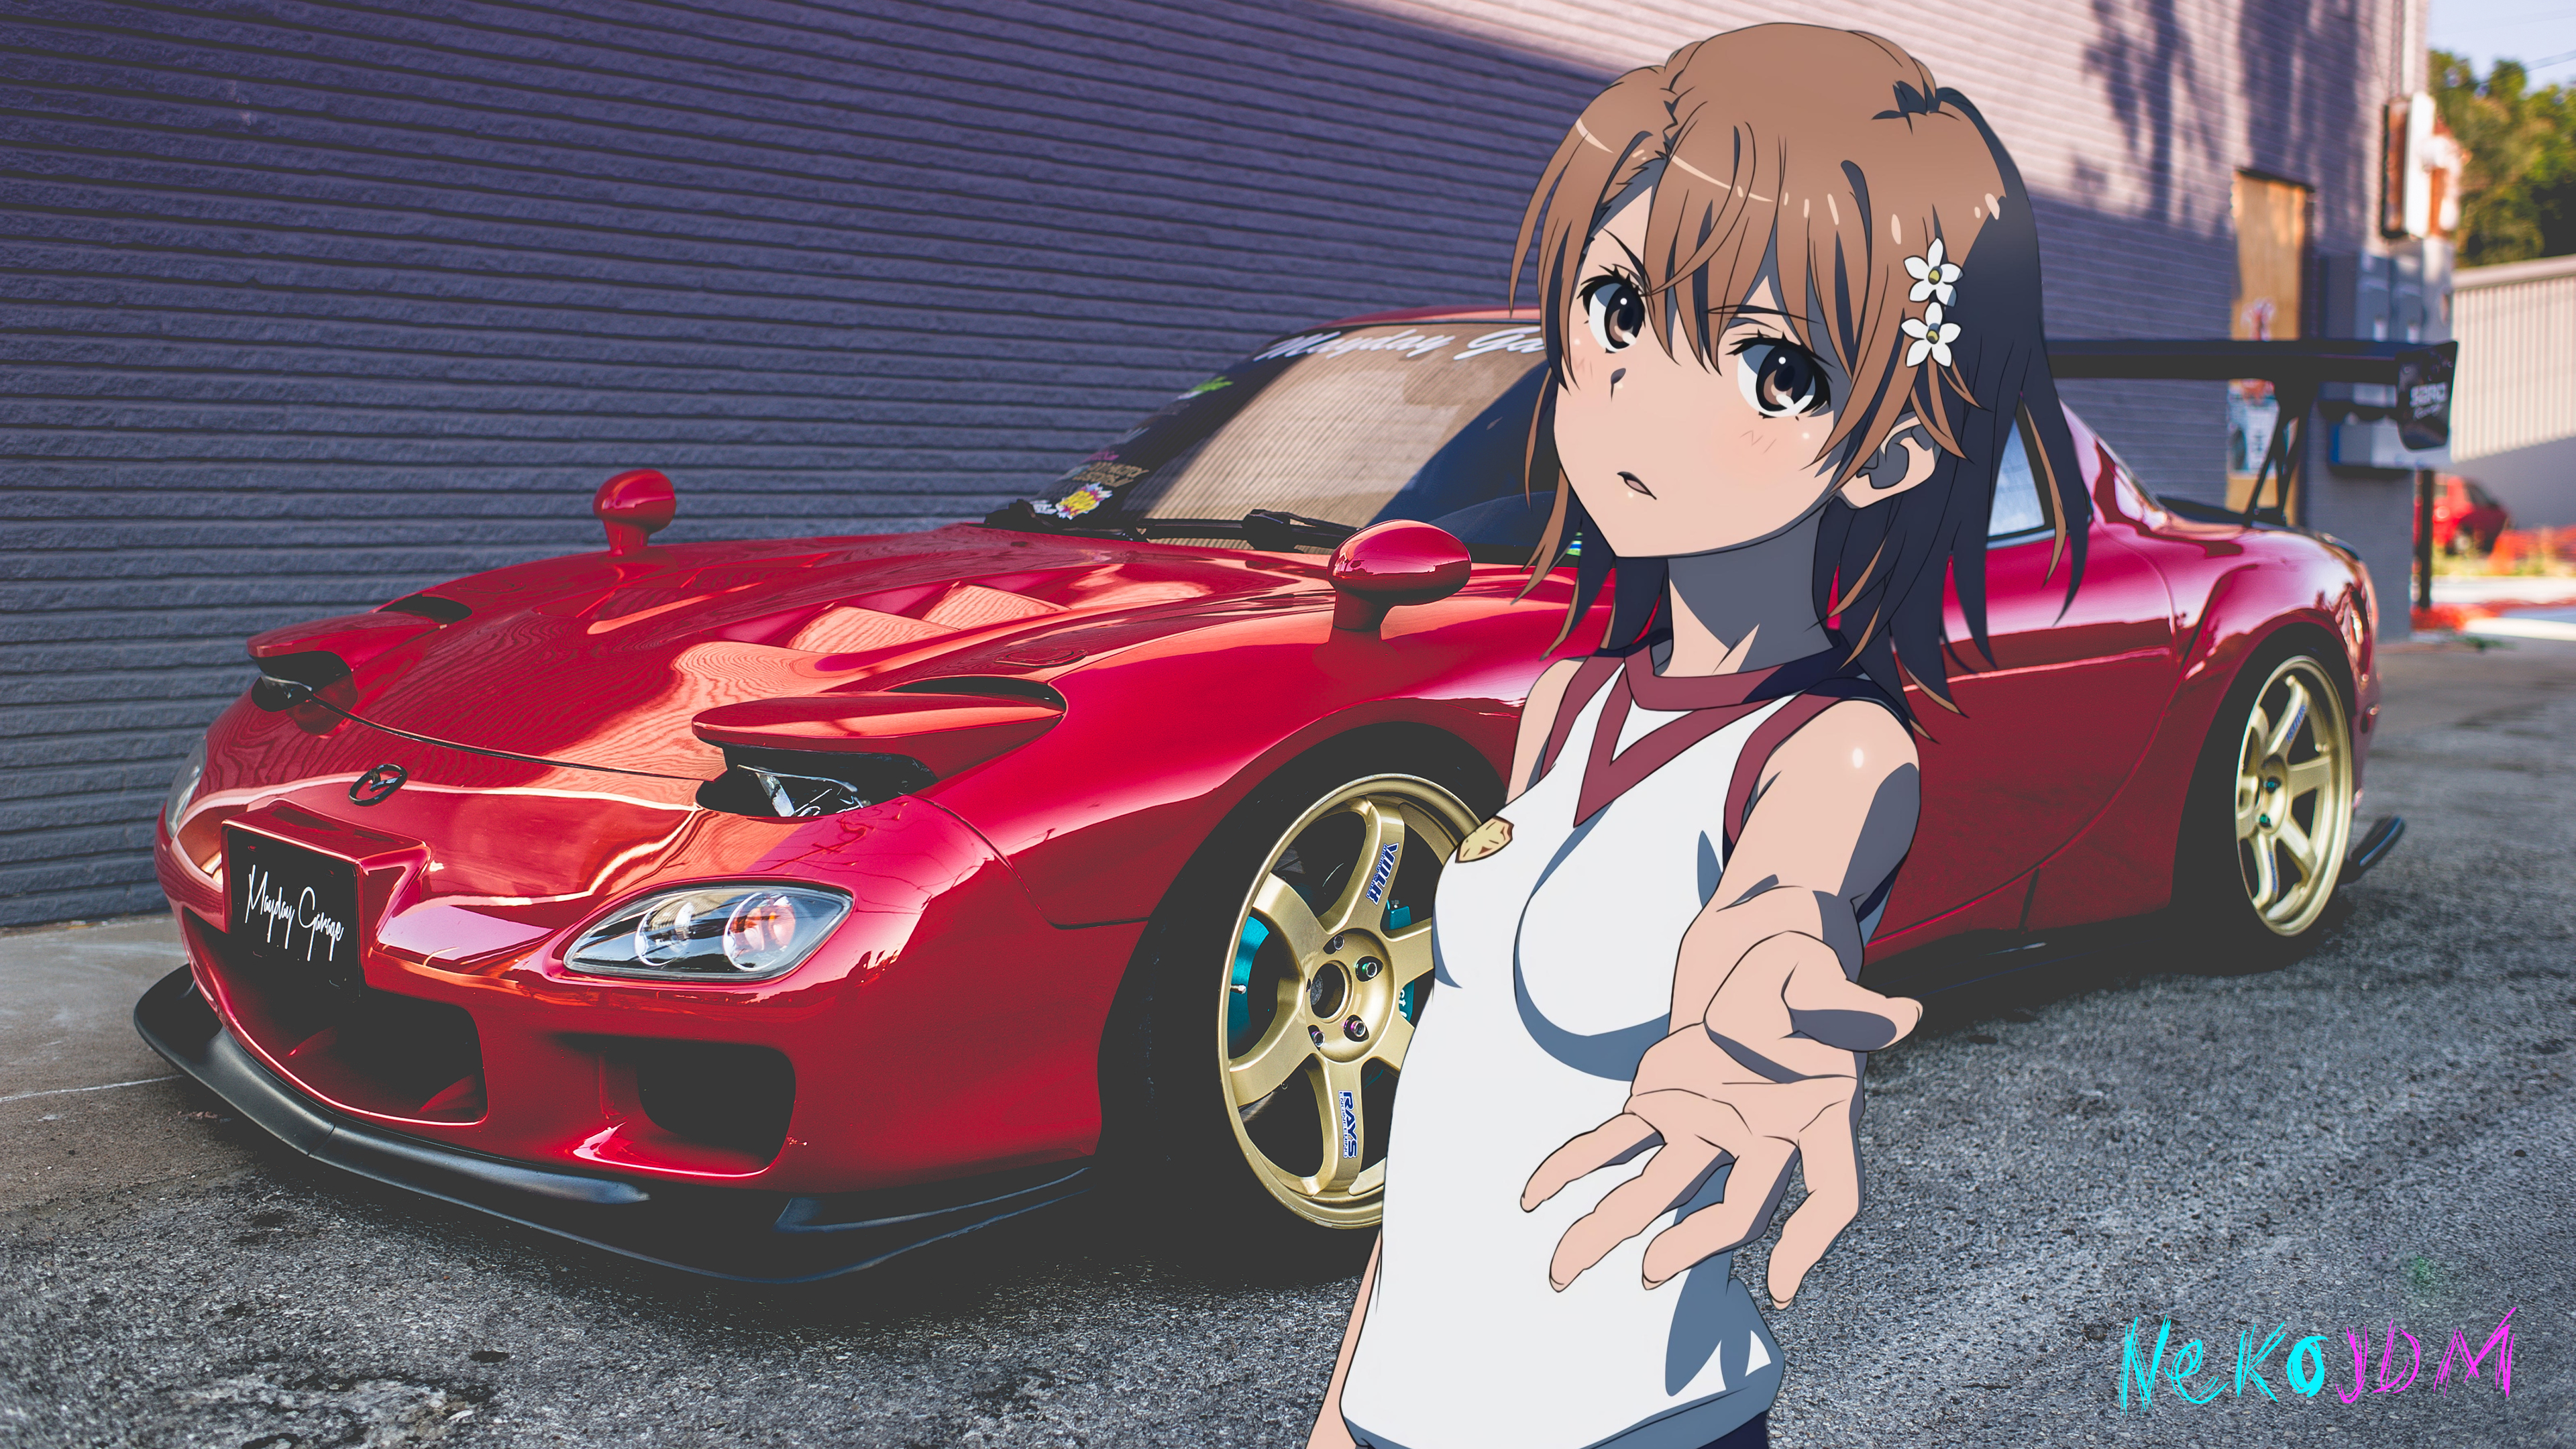 Anime 3840x2160 car Mazda Mazda RX-7 picture-in-picture screen shot anime red cars vehicle brunette pop-up headlights animeirl